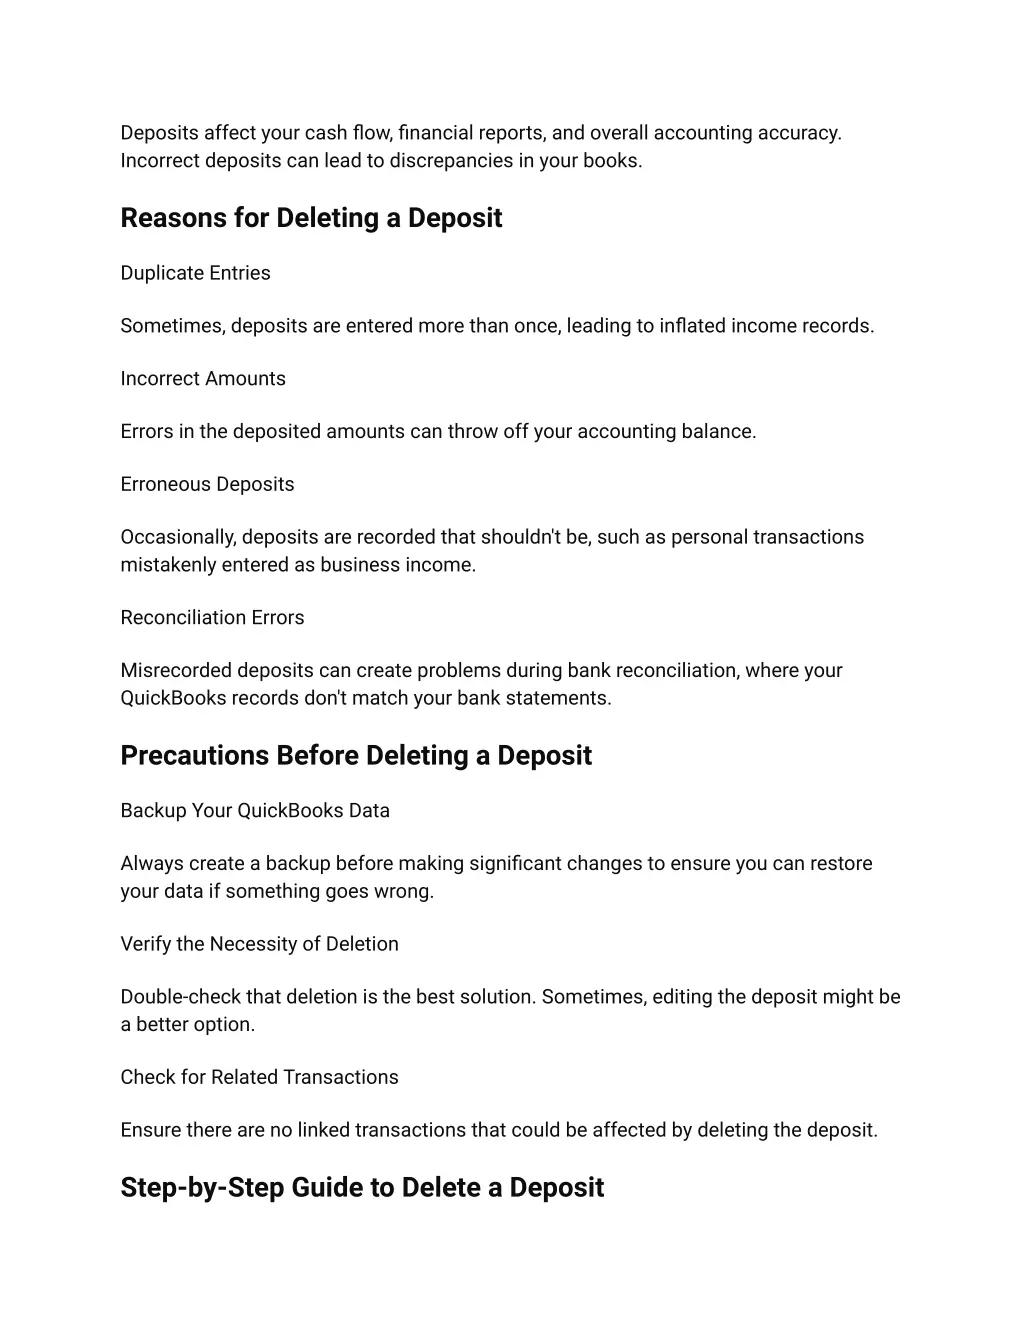 deposits affect your cash flow financial reports